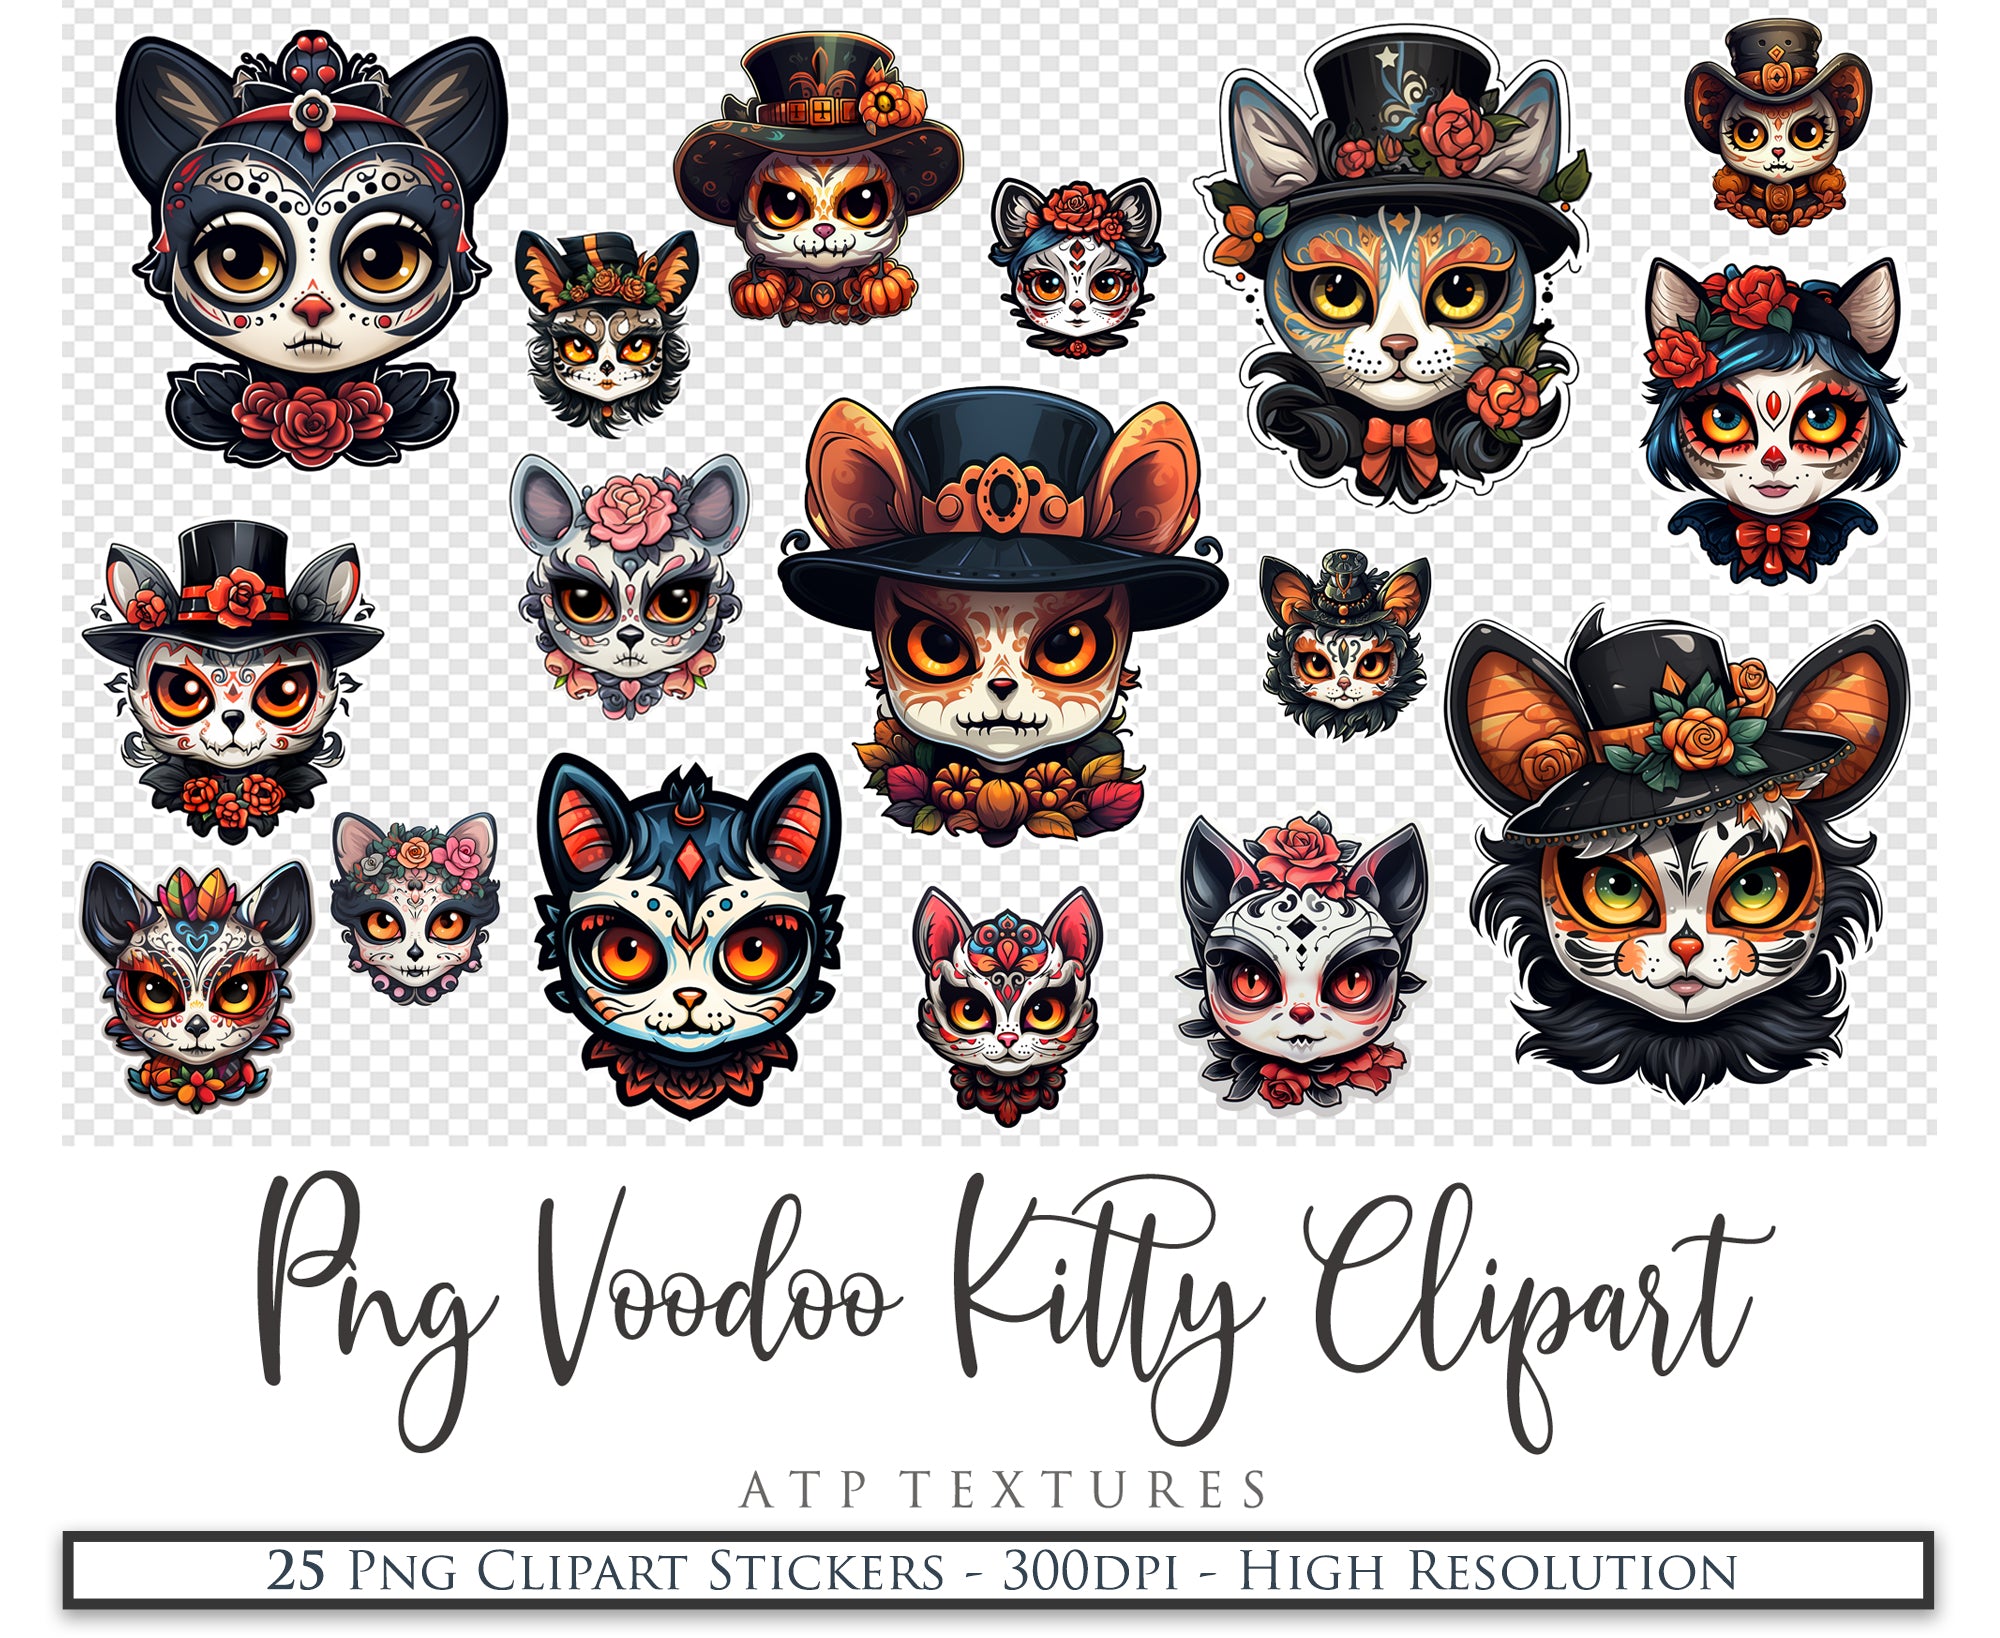 Voodoo Kitty Halloween clipart. Perfect for all your scrapbooking and card making needs.  300dpi. High resolution. If you want to print your completed artwork, you can!  These are PNG Transparent files, high resolution and 300dpi. They can easily be printed without losing any quality.